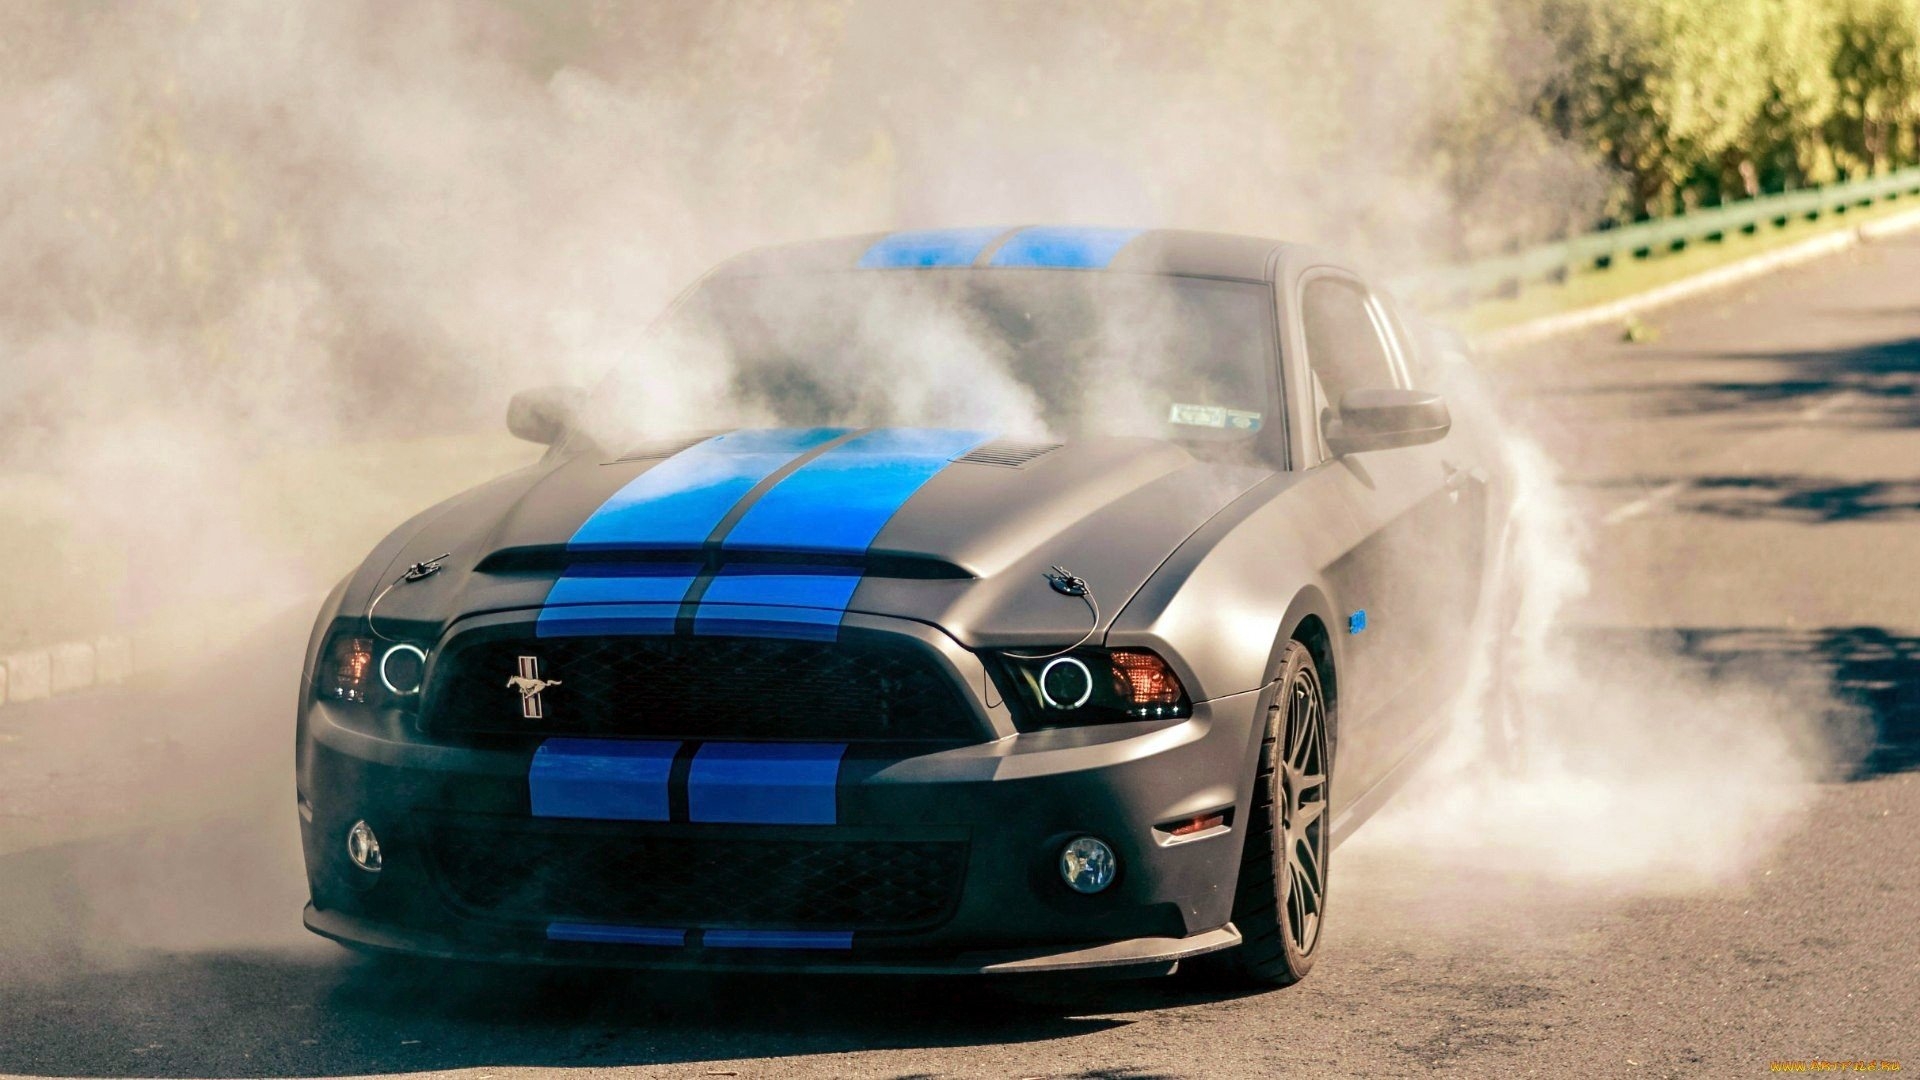 Ford Mustang Shelby Gt500 Burnout Front View Muscle Super Snake Mustang Burnout 1920x1080 Wallpaper Teahub Io